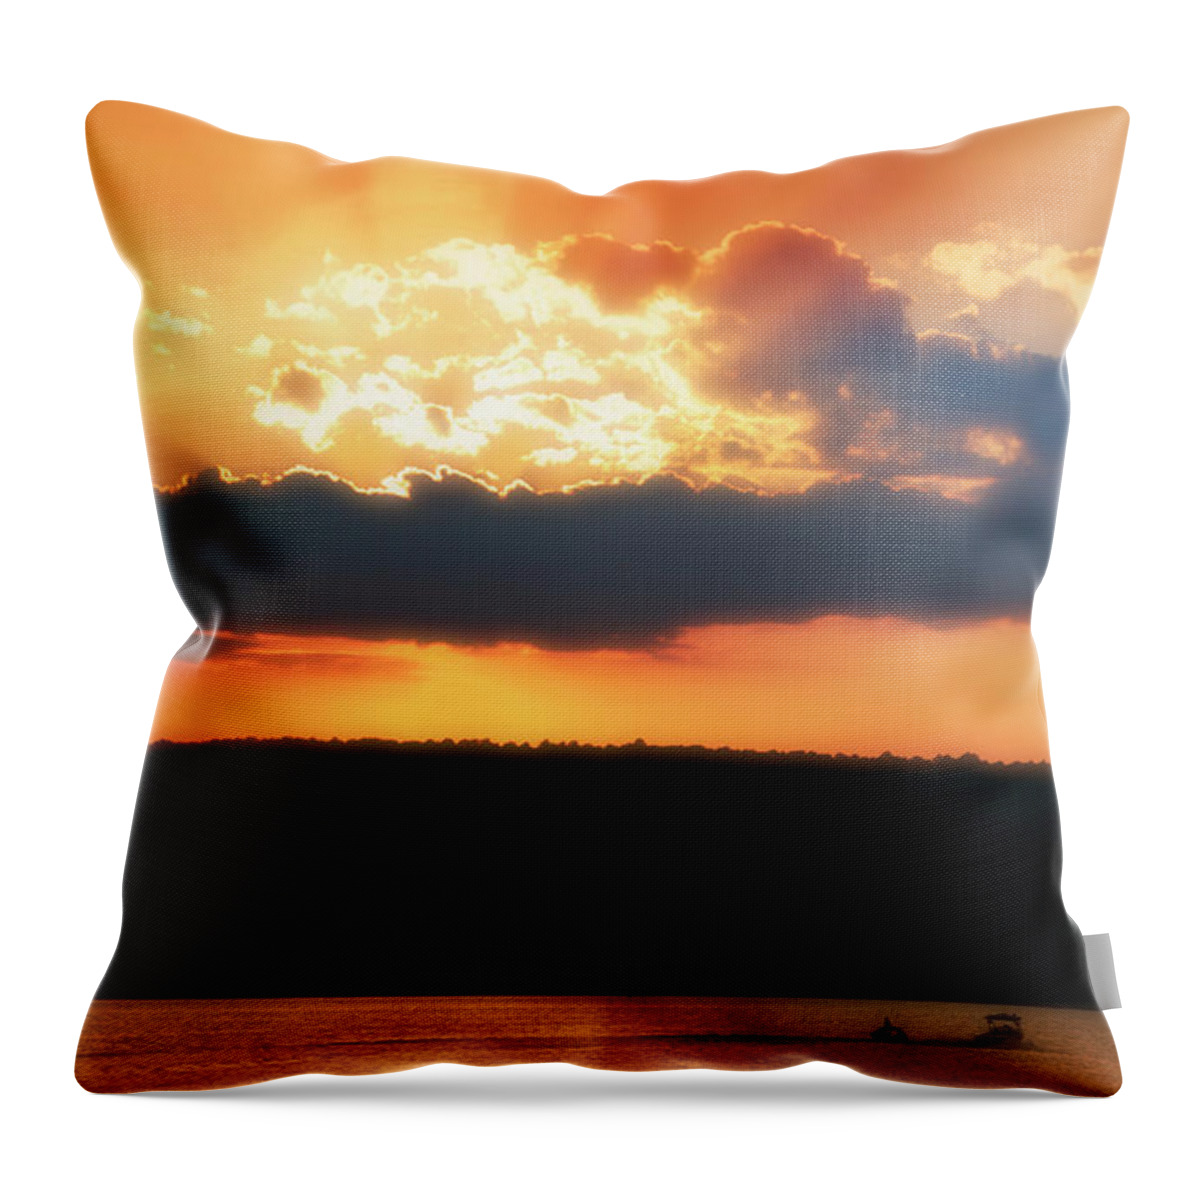 Finger Lakes New York Throw Pillow featuring the photograph Boating At Sun Set Finger Lakes New York by Thomas Woolworth